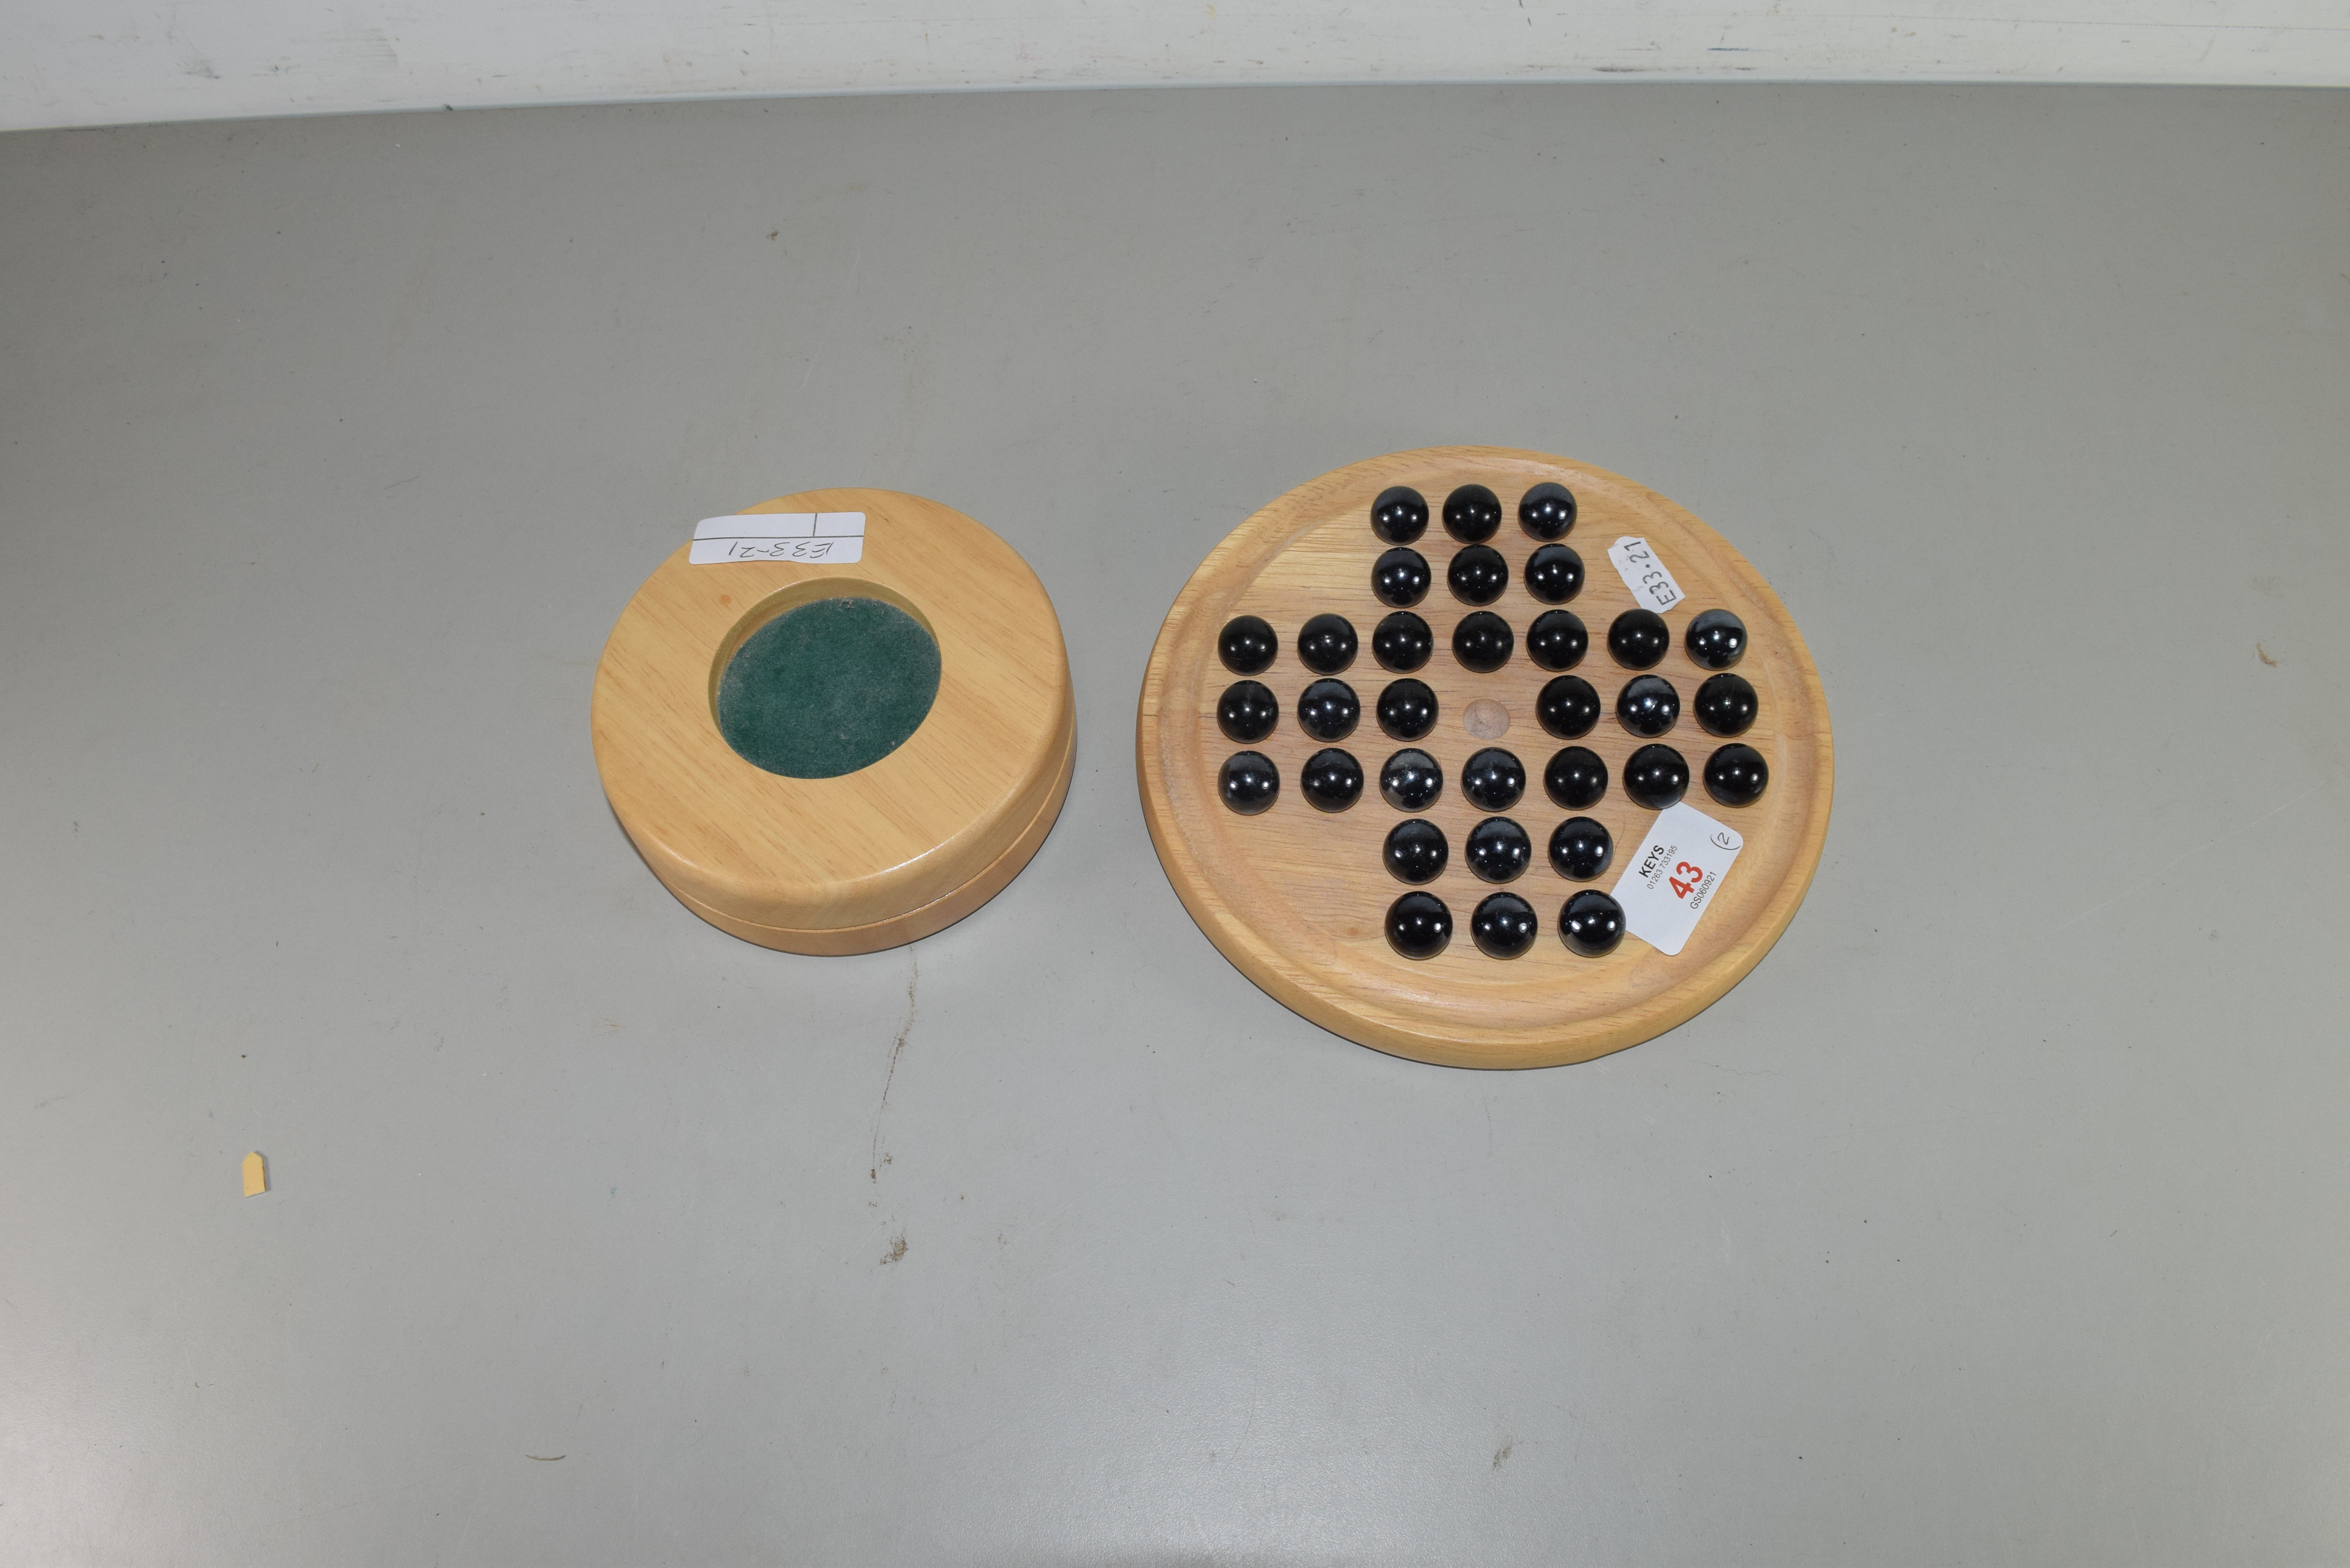 MODERN SOLITAIRE BOARD AND MARBLES, TOGETHER WITH A TIDDLYWINKS GAME